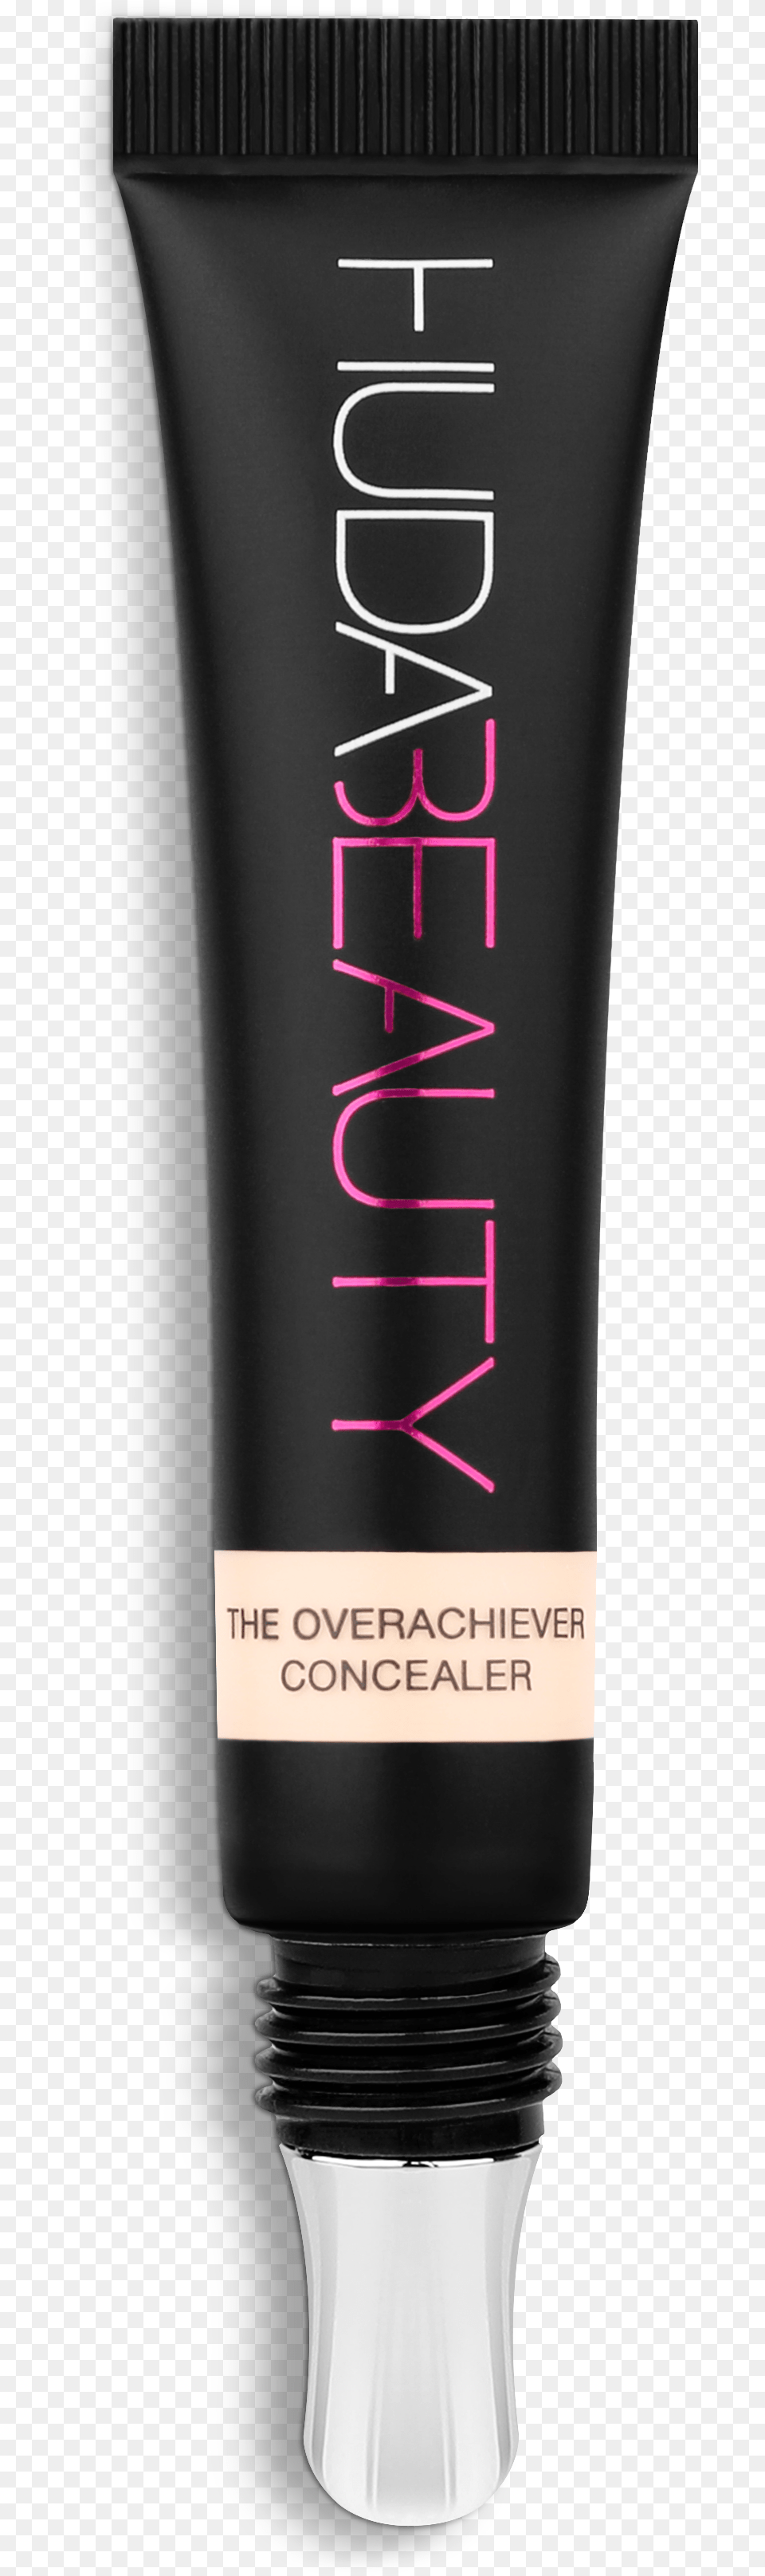 The Overachiever Concealer Hi Res Consiler Huda Beauty, Bottle, Aftershave, Cosmetics, Smoke Pipe Png